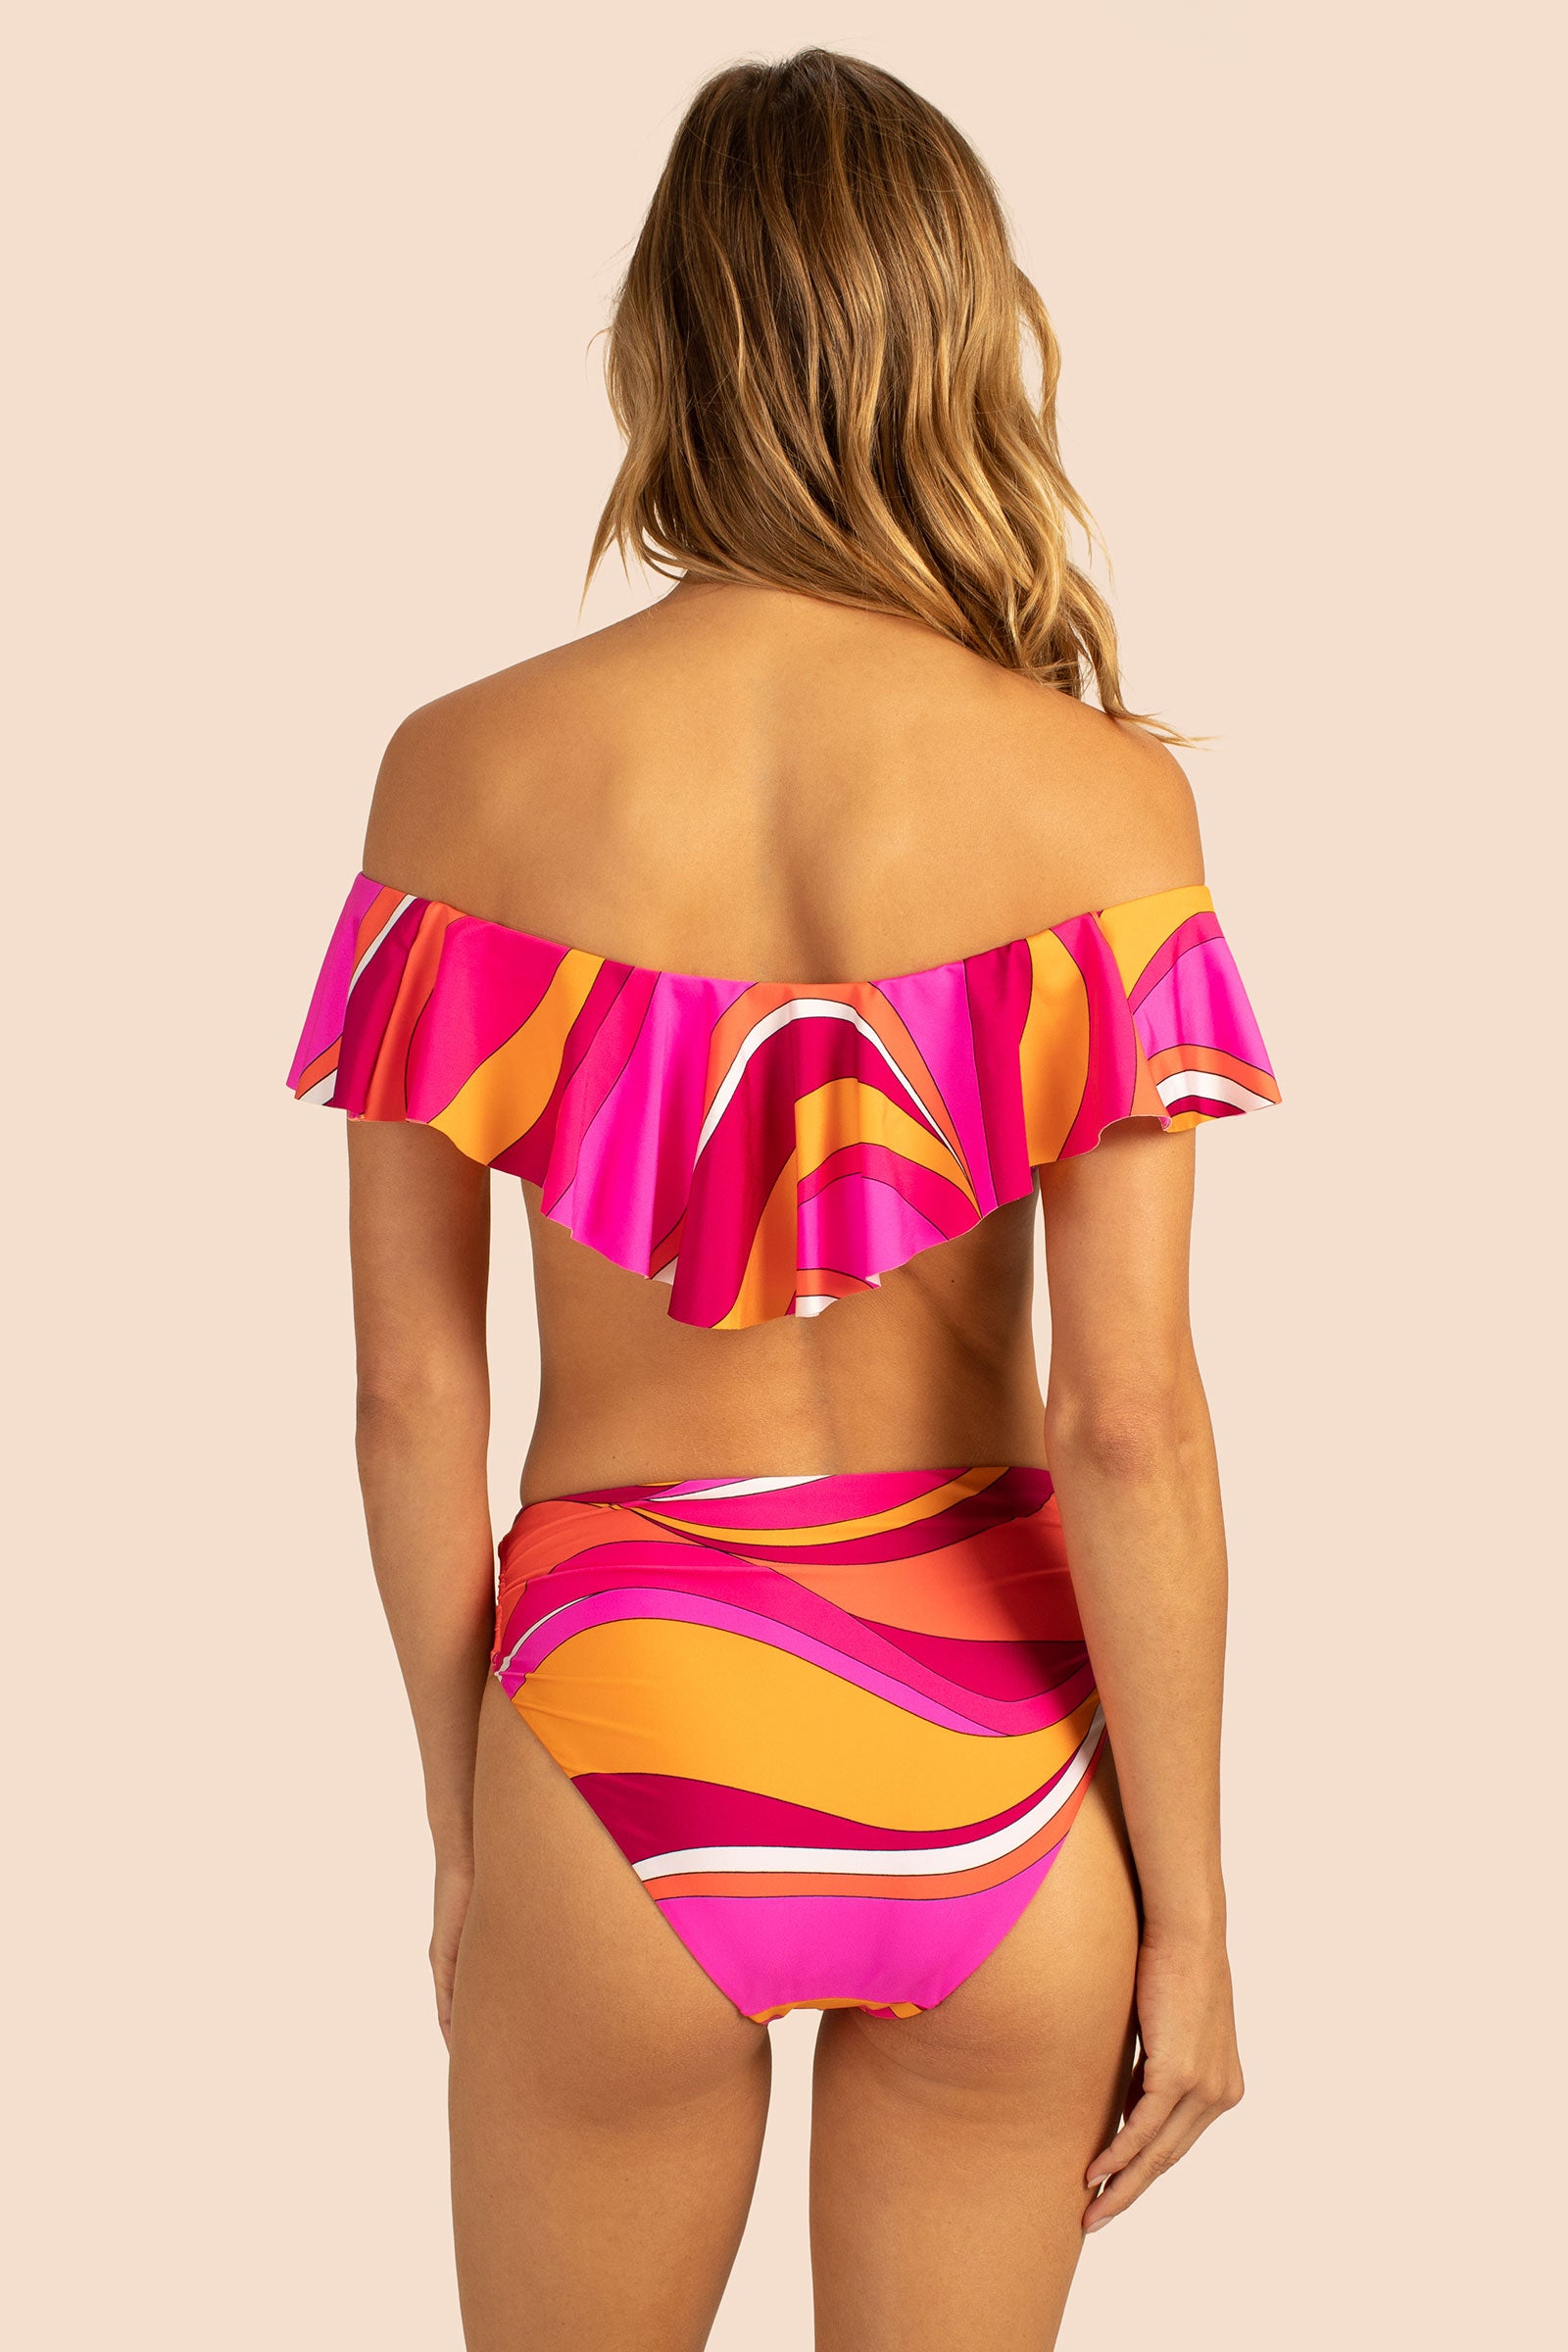 Amazing Bandeau Tankini with Retro Straps Over The Shoulder #418OTS bra cup  size B-D